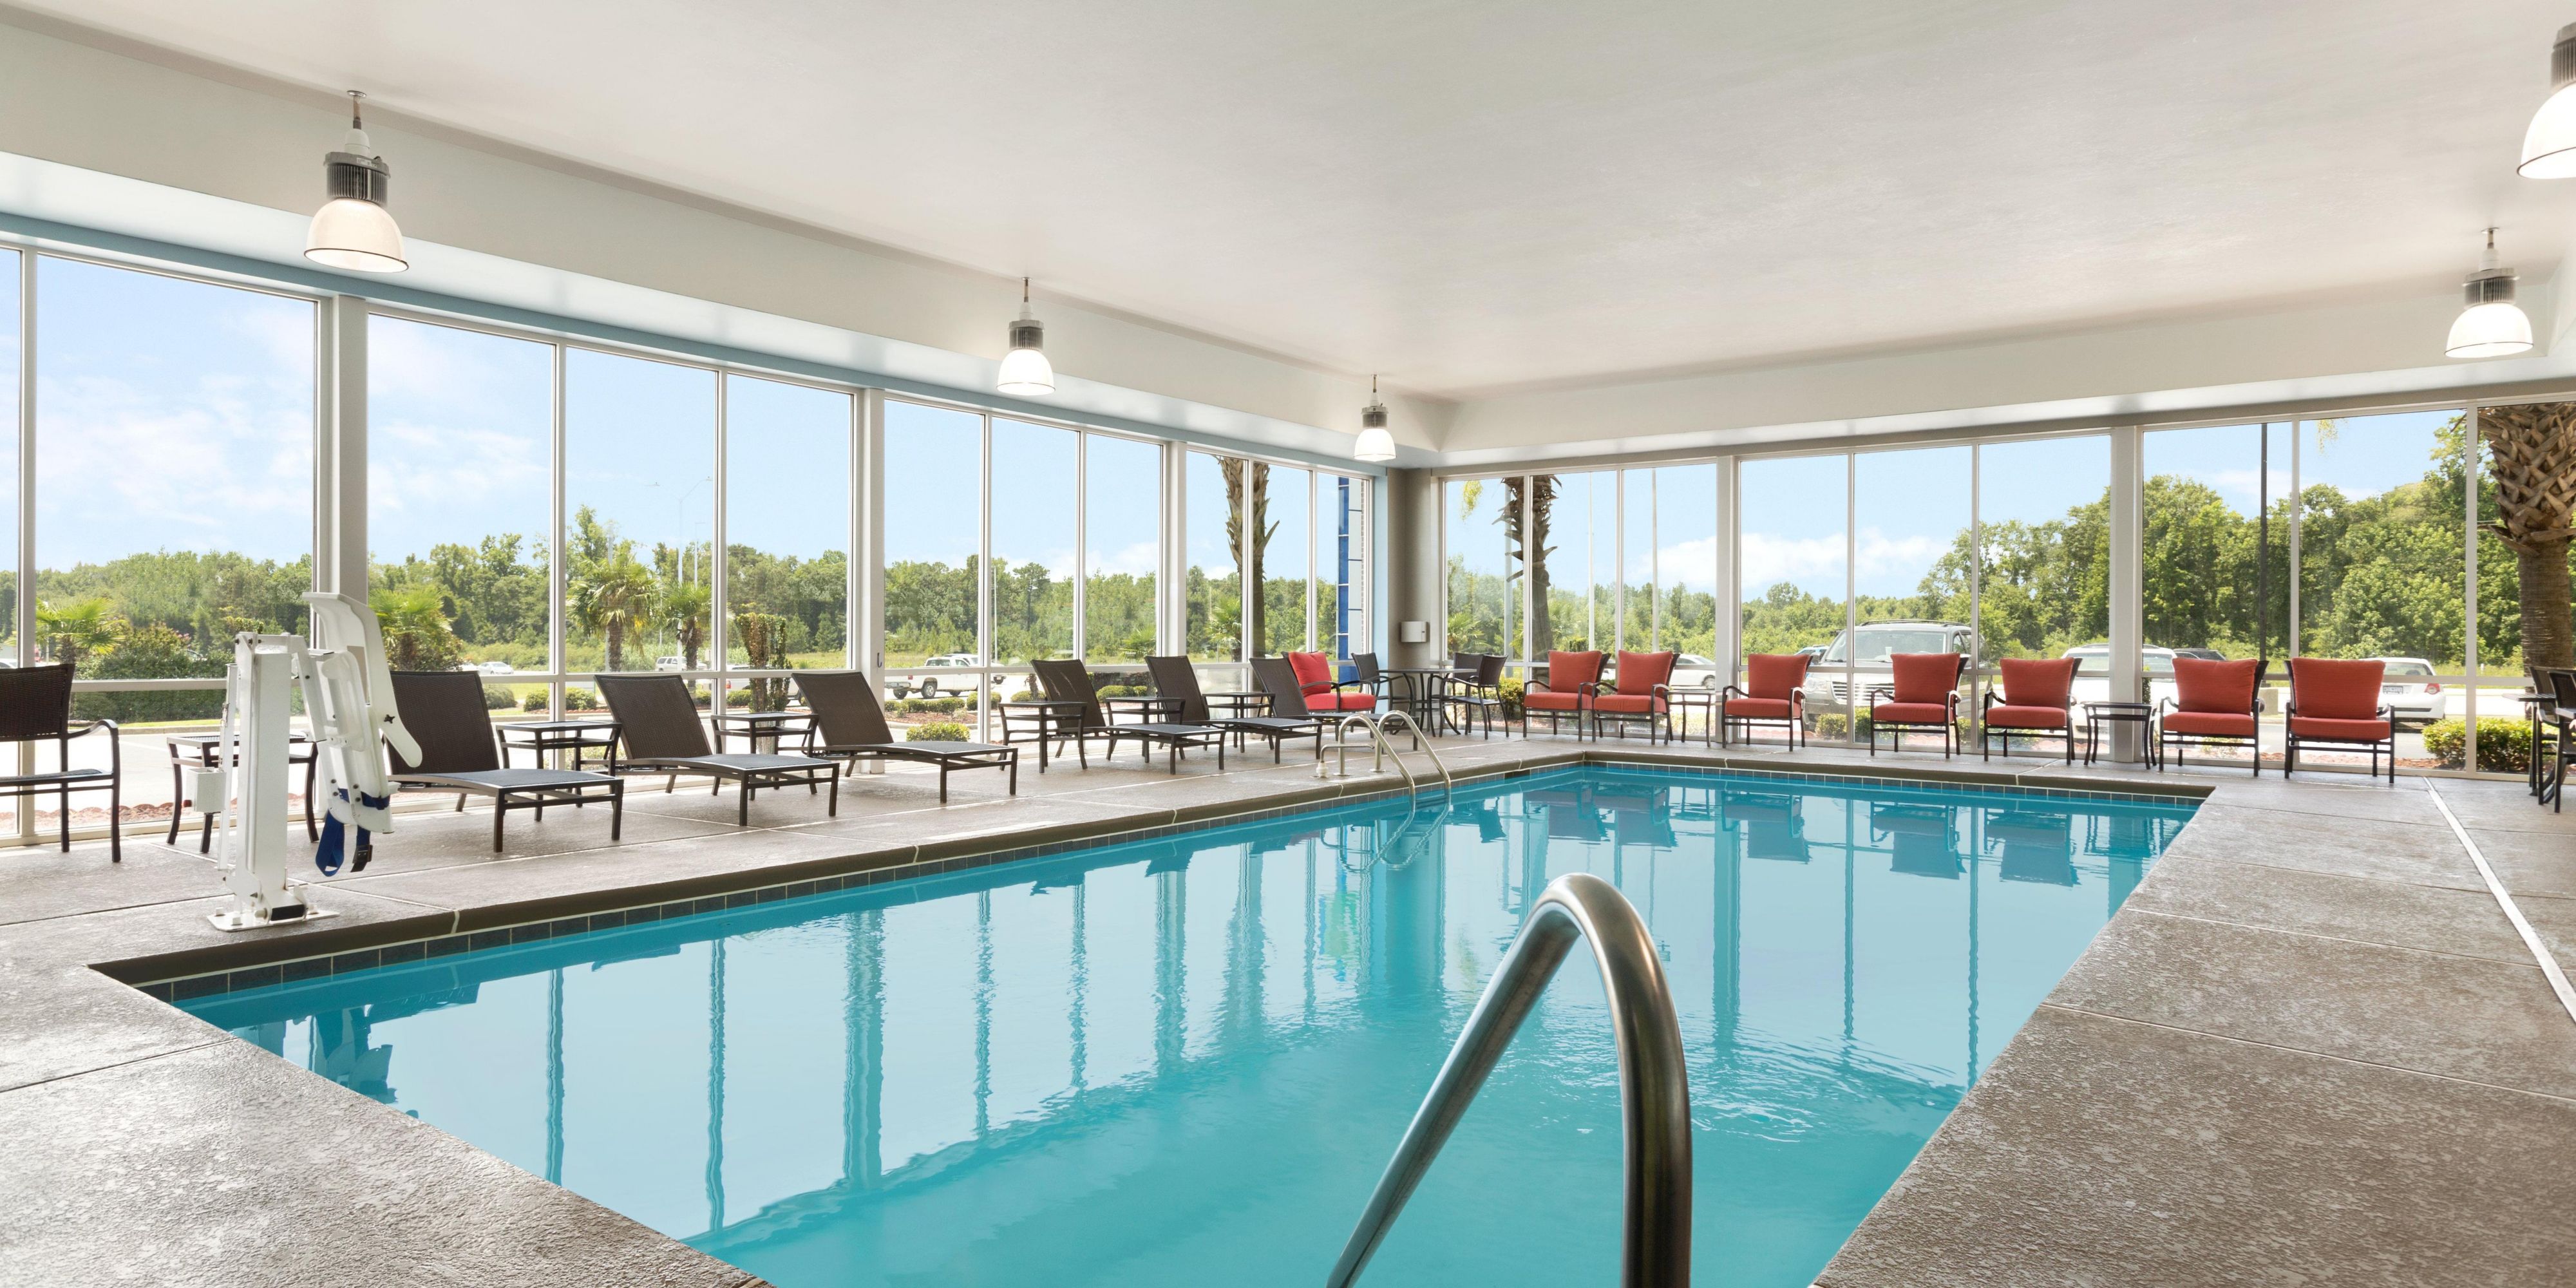 Looking for a Staycation? Stay with us and enjoy our Indoor Heated Saltwater Pool during your stay.